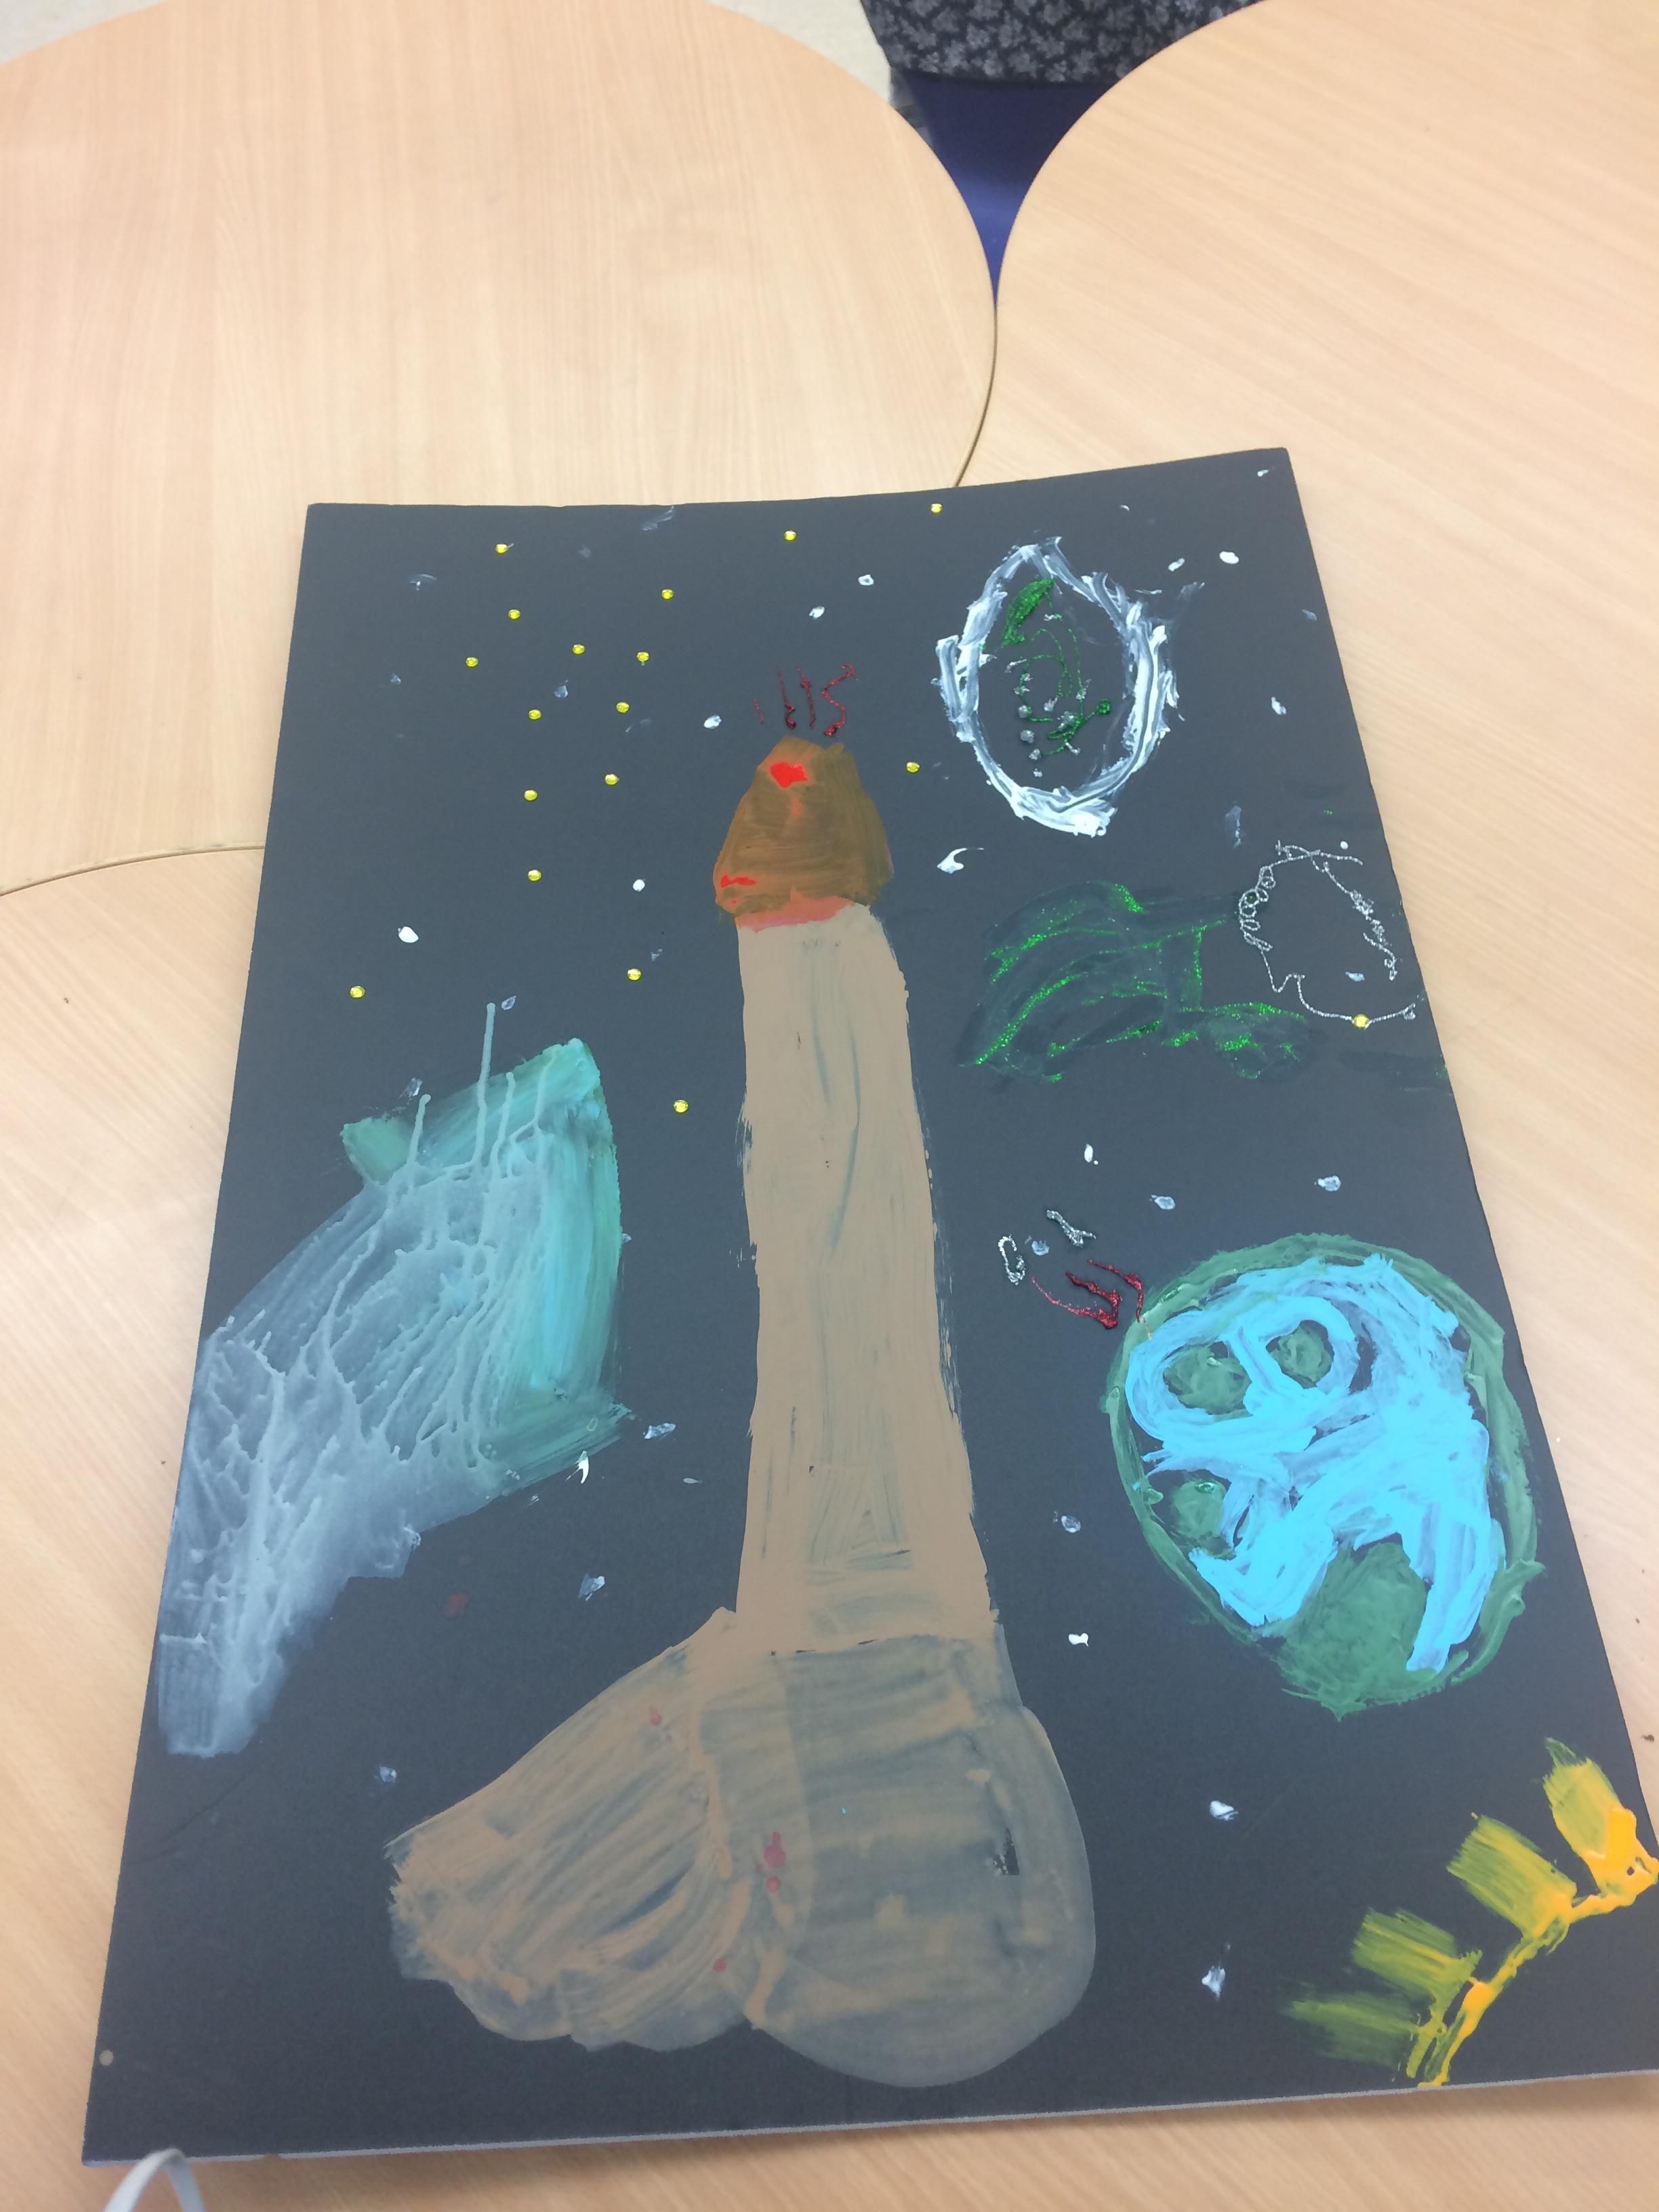 This is one of my 3rd grade student’s “rocket ship” for our solar system posters that get hung around the room.